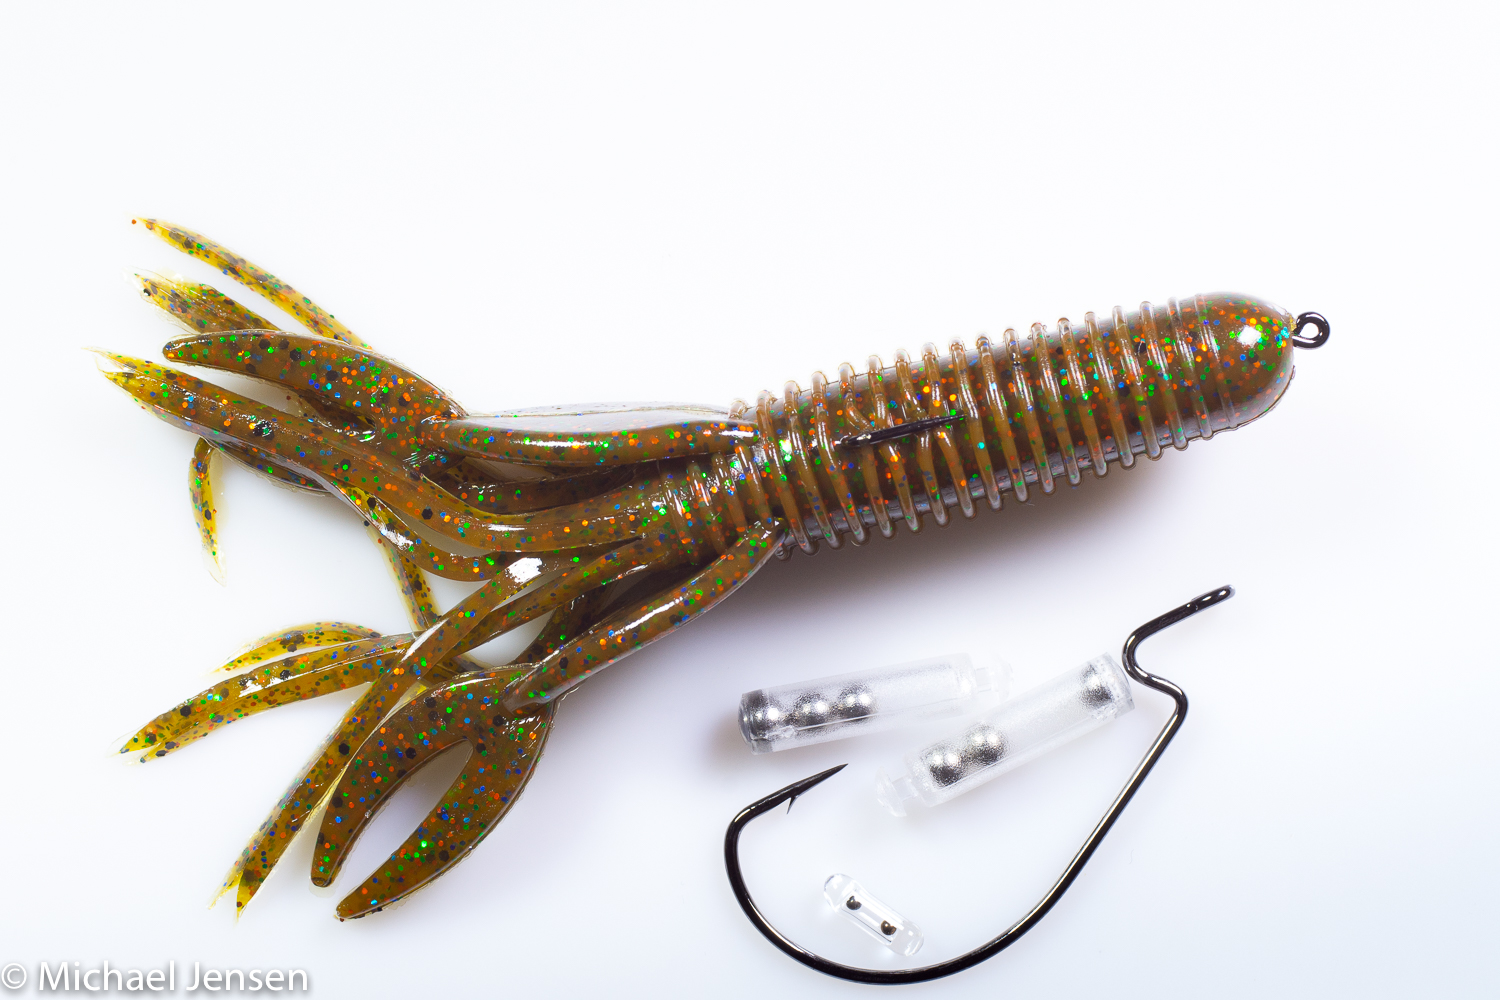 Put a rattle inside your Tube Bait - DIY angling tip - Michael